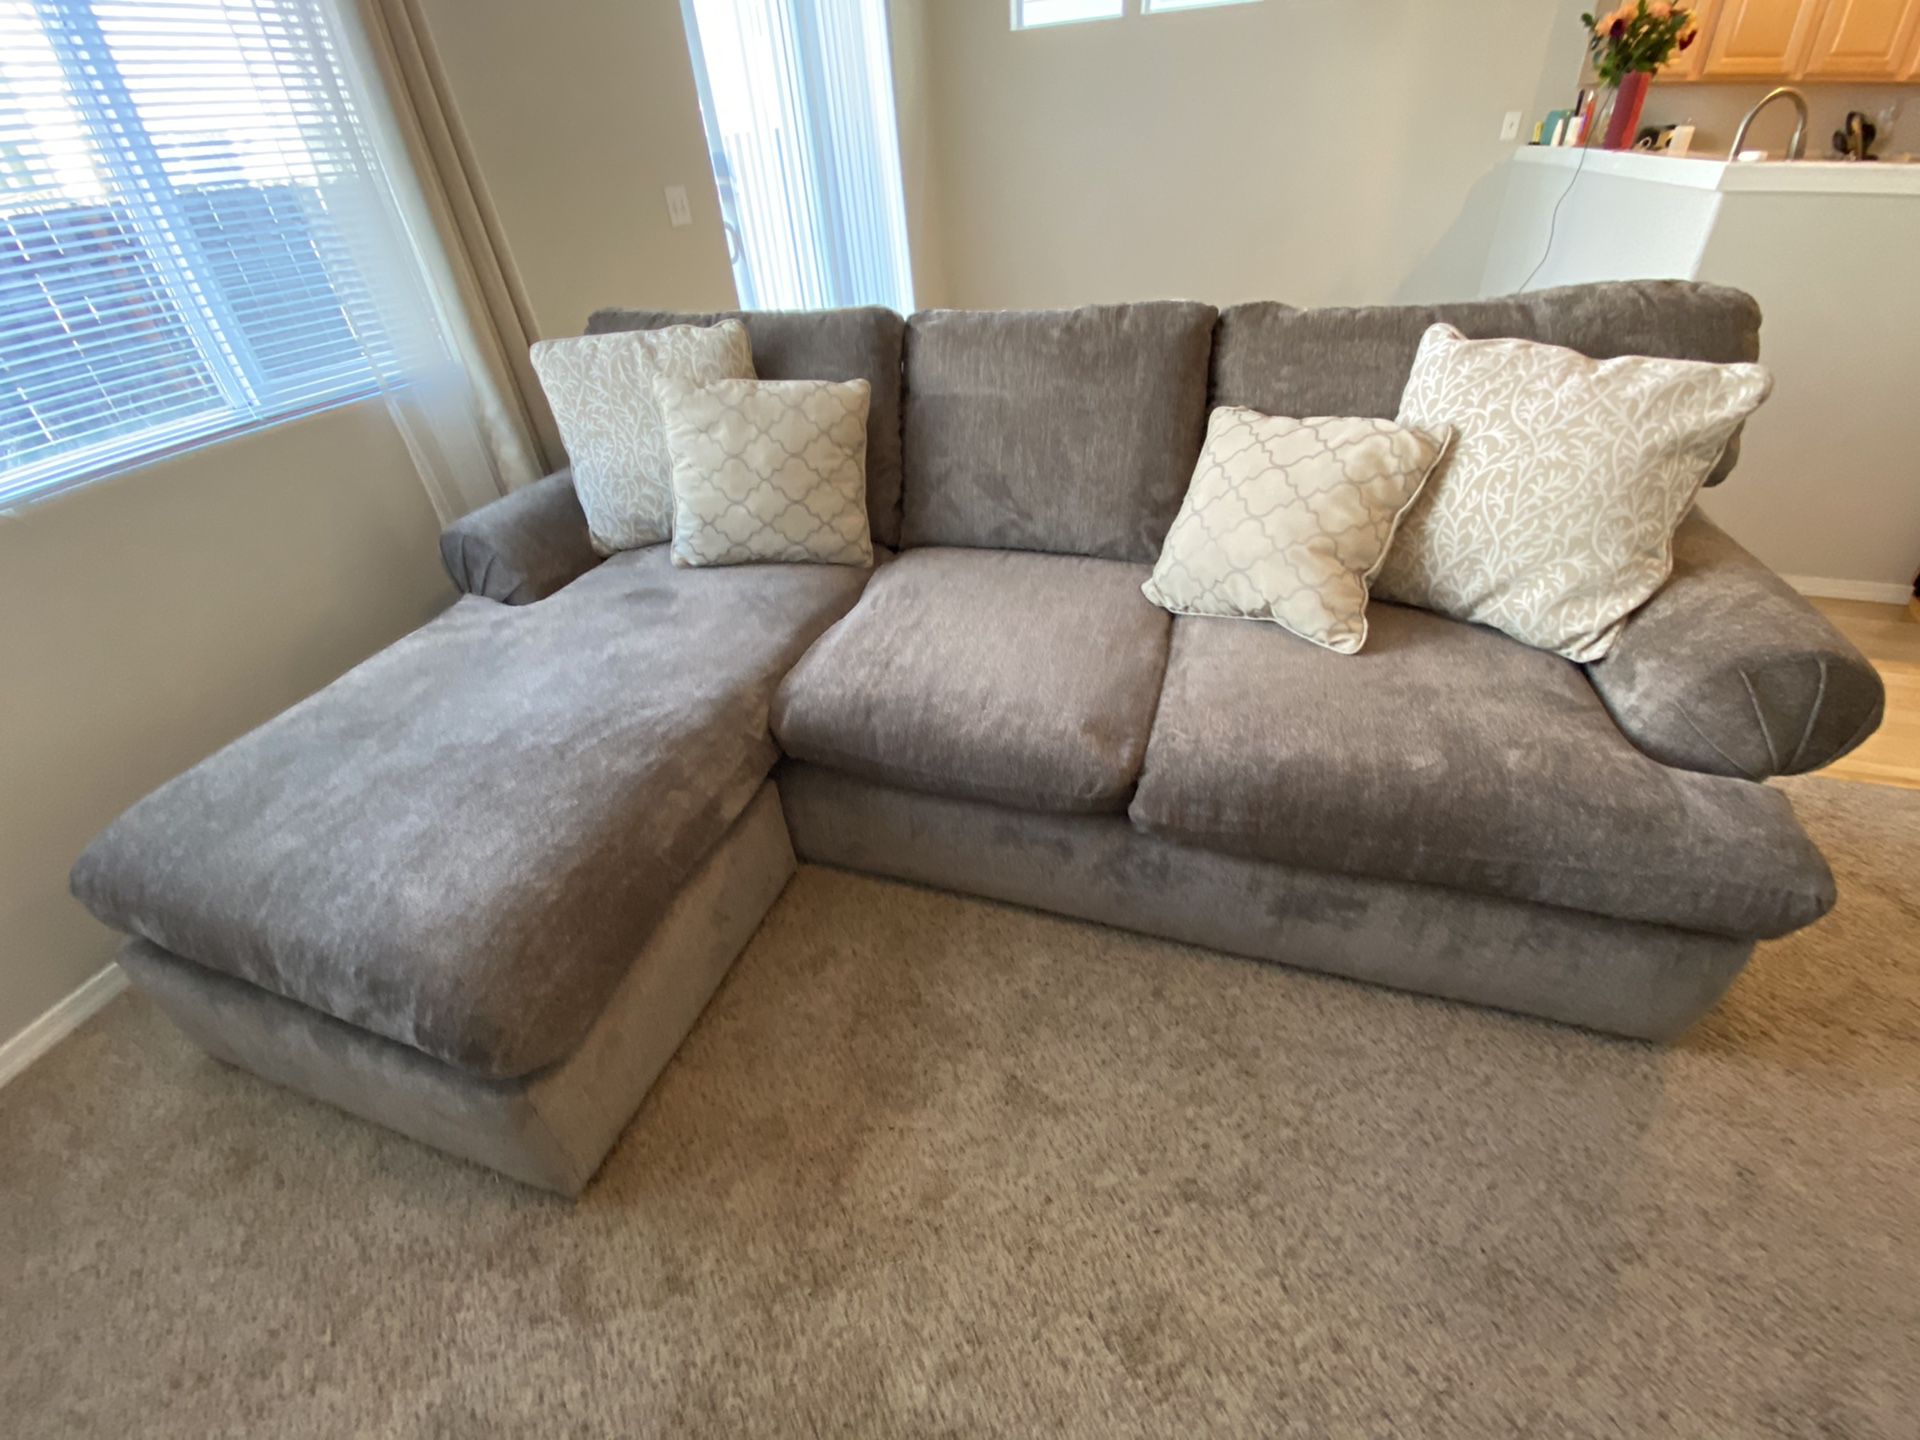 Barely used down feather micro fiber sectional with chaise